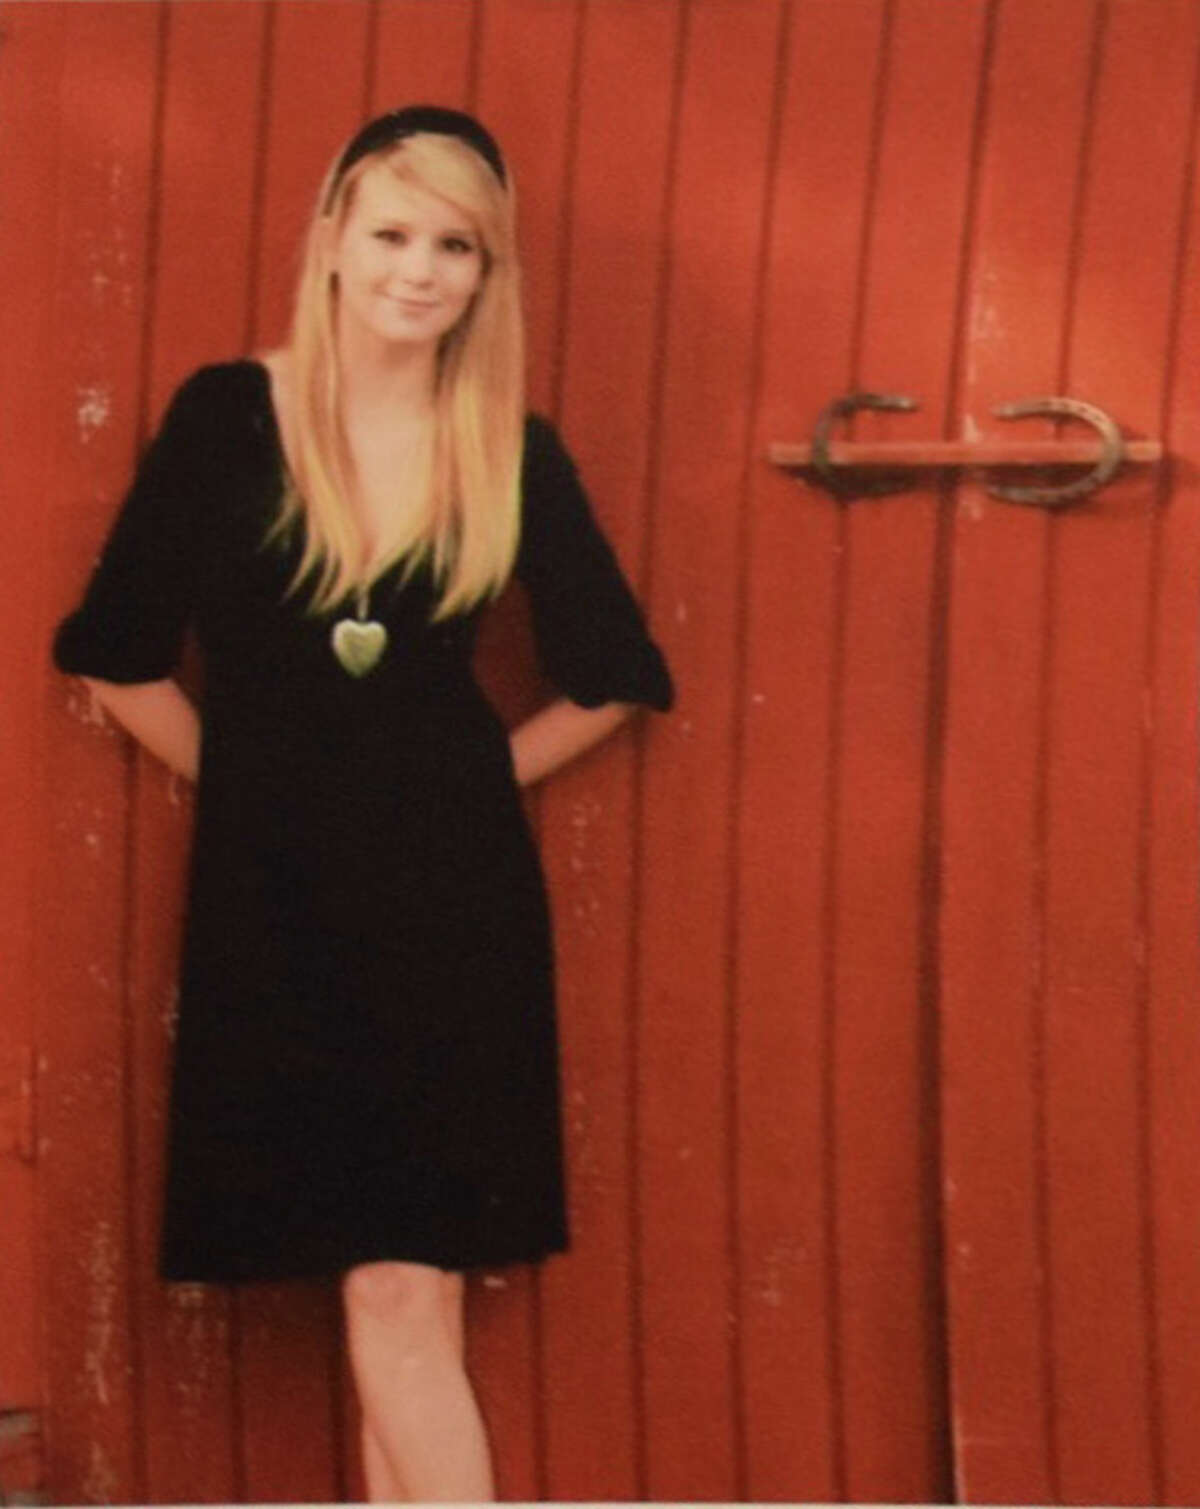 Julie Mott, died on Aug. 8 at age 25. Her body was stolen from the Mission Park Funeral Chapels.